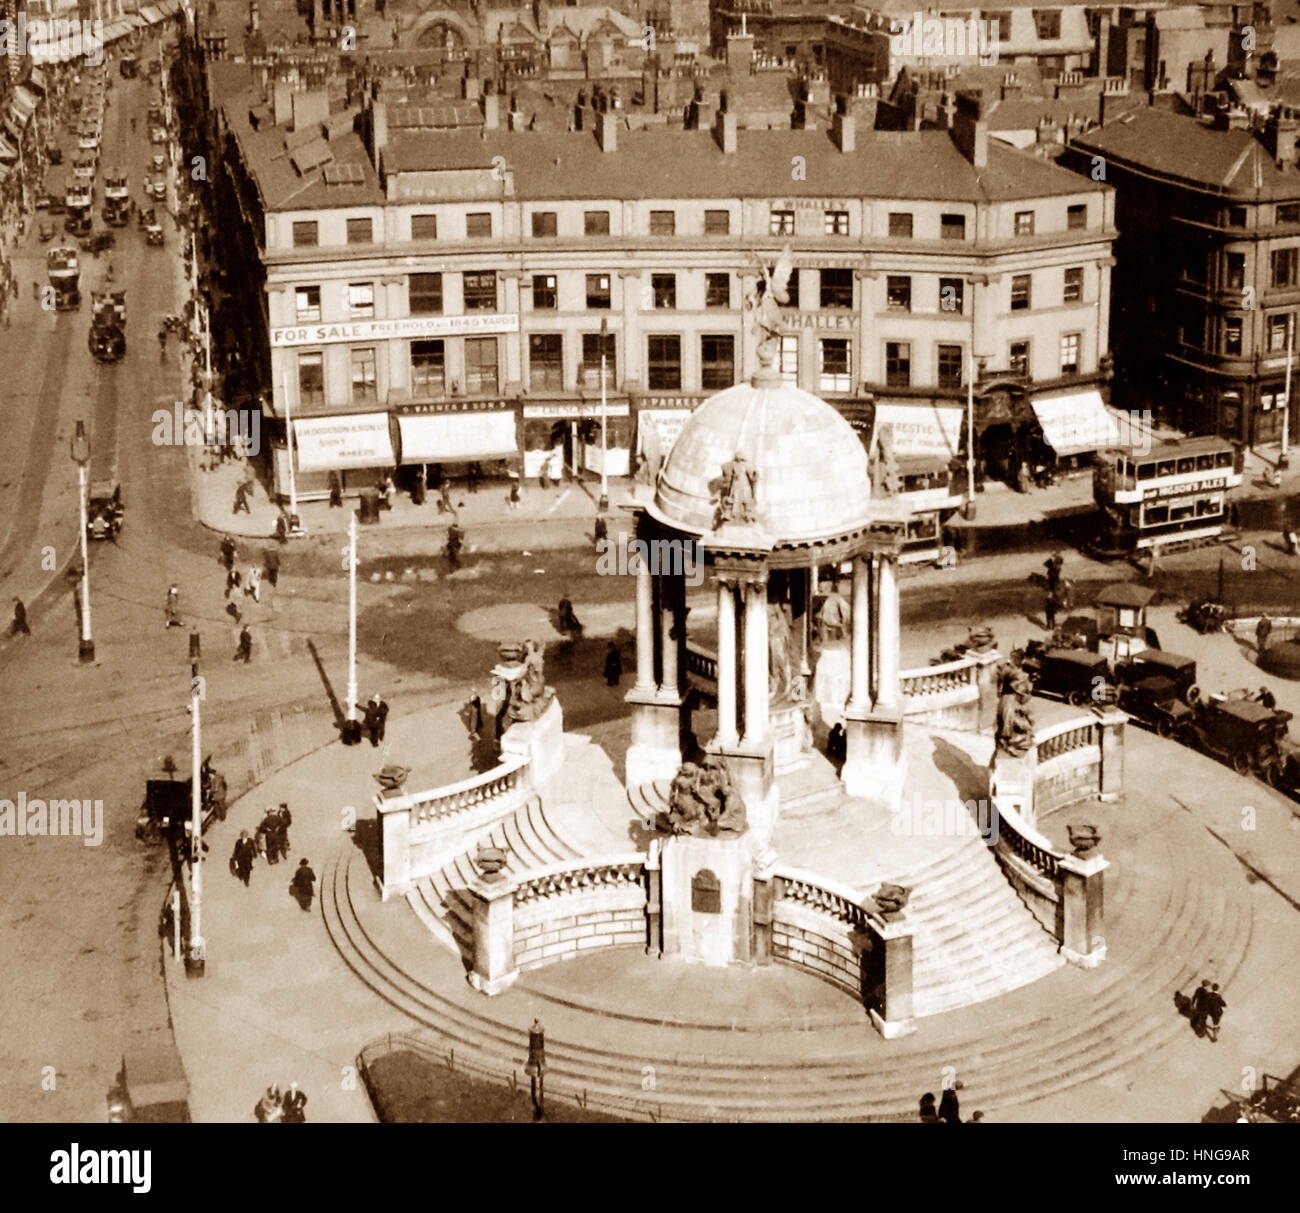 St George's Circus, Lord Street, Liverpool - probablement 1920 Banque D'Images